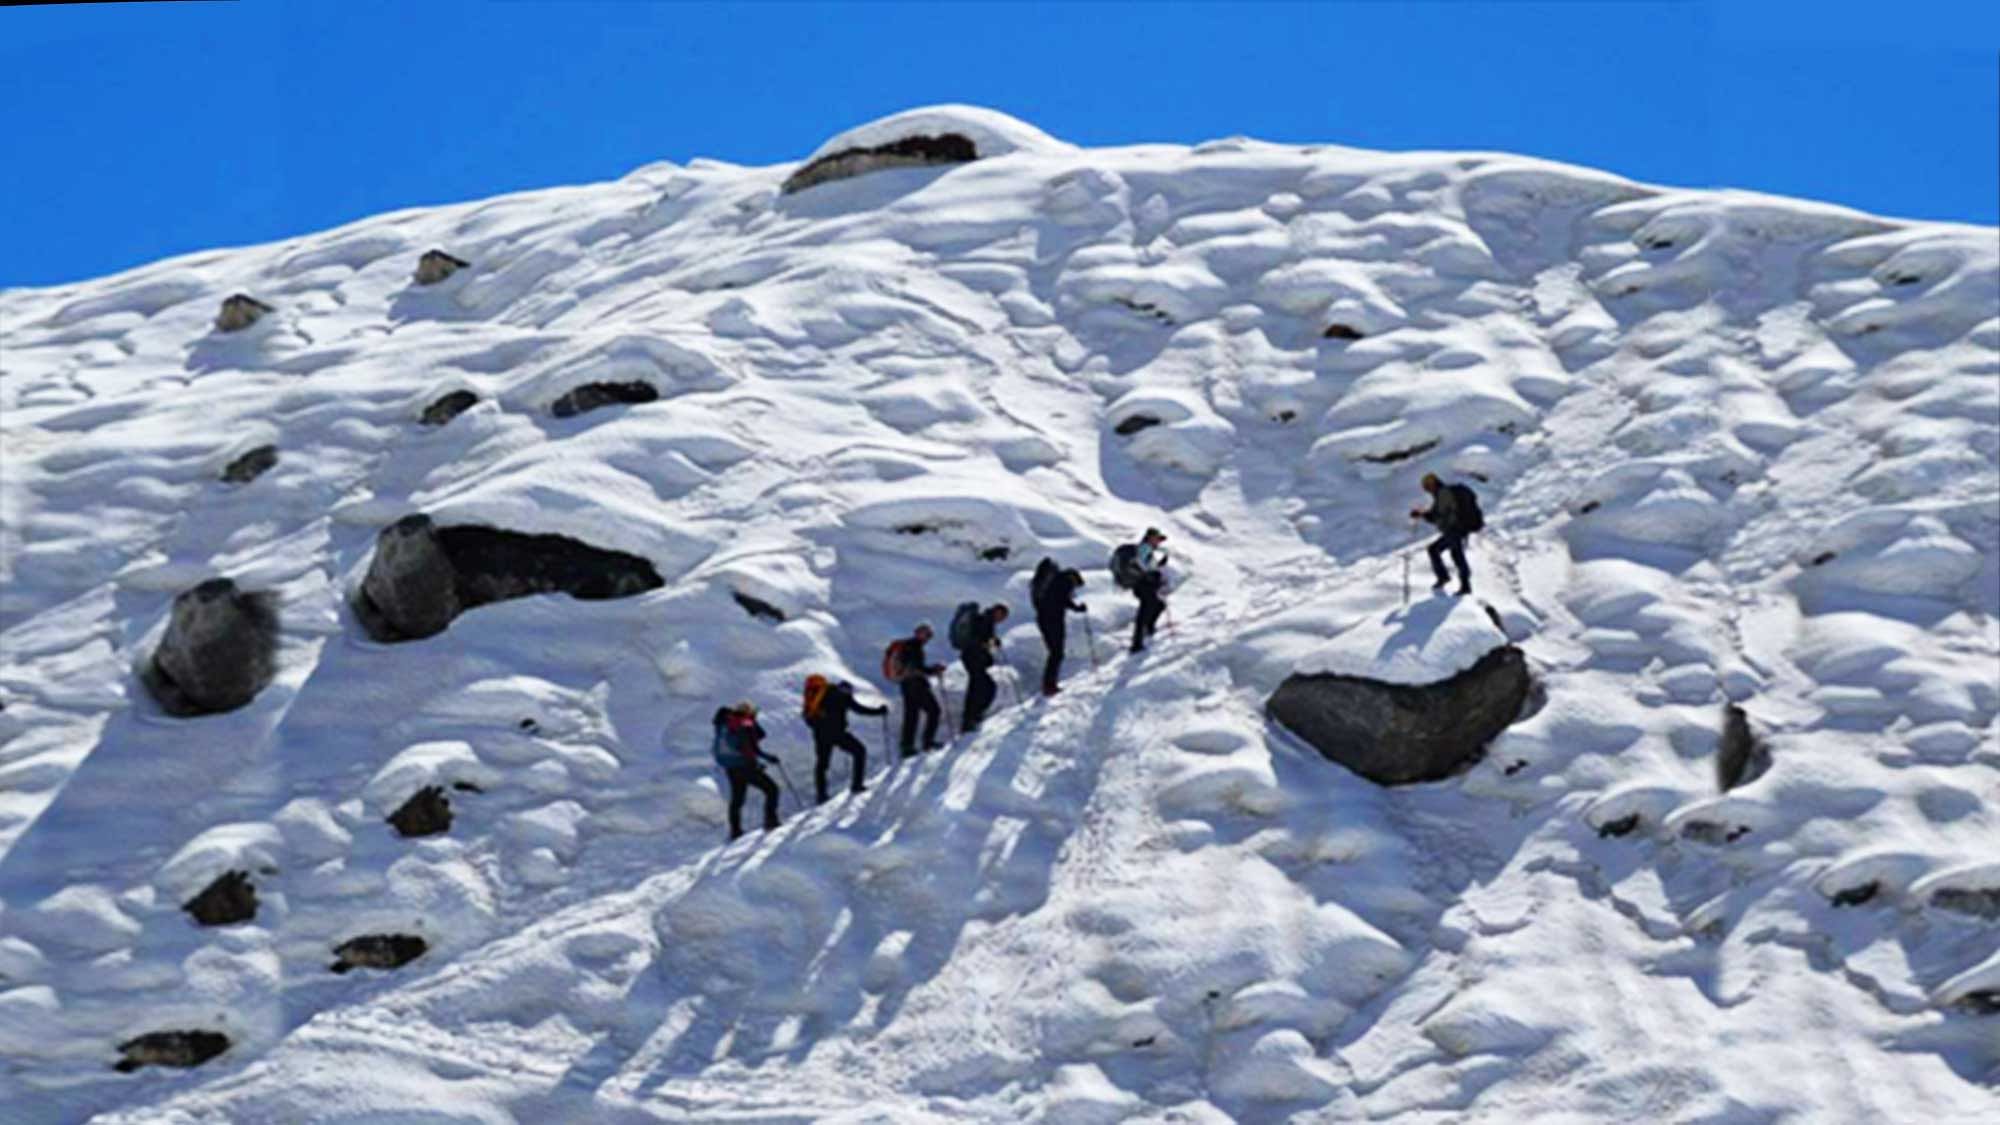 Indian Army soldiers take part in pre-induction training at Siachen Glacier. Image used for representational purposes only.